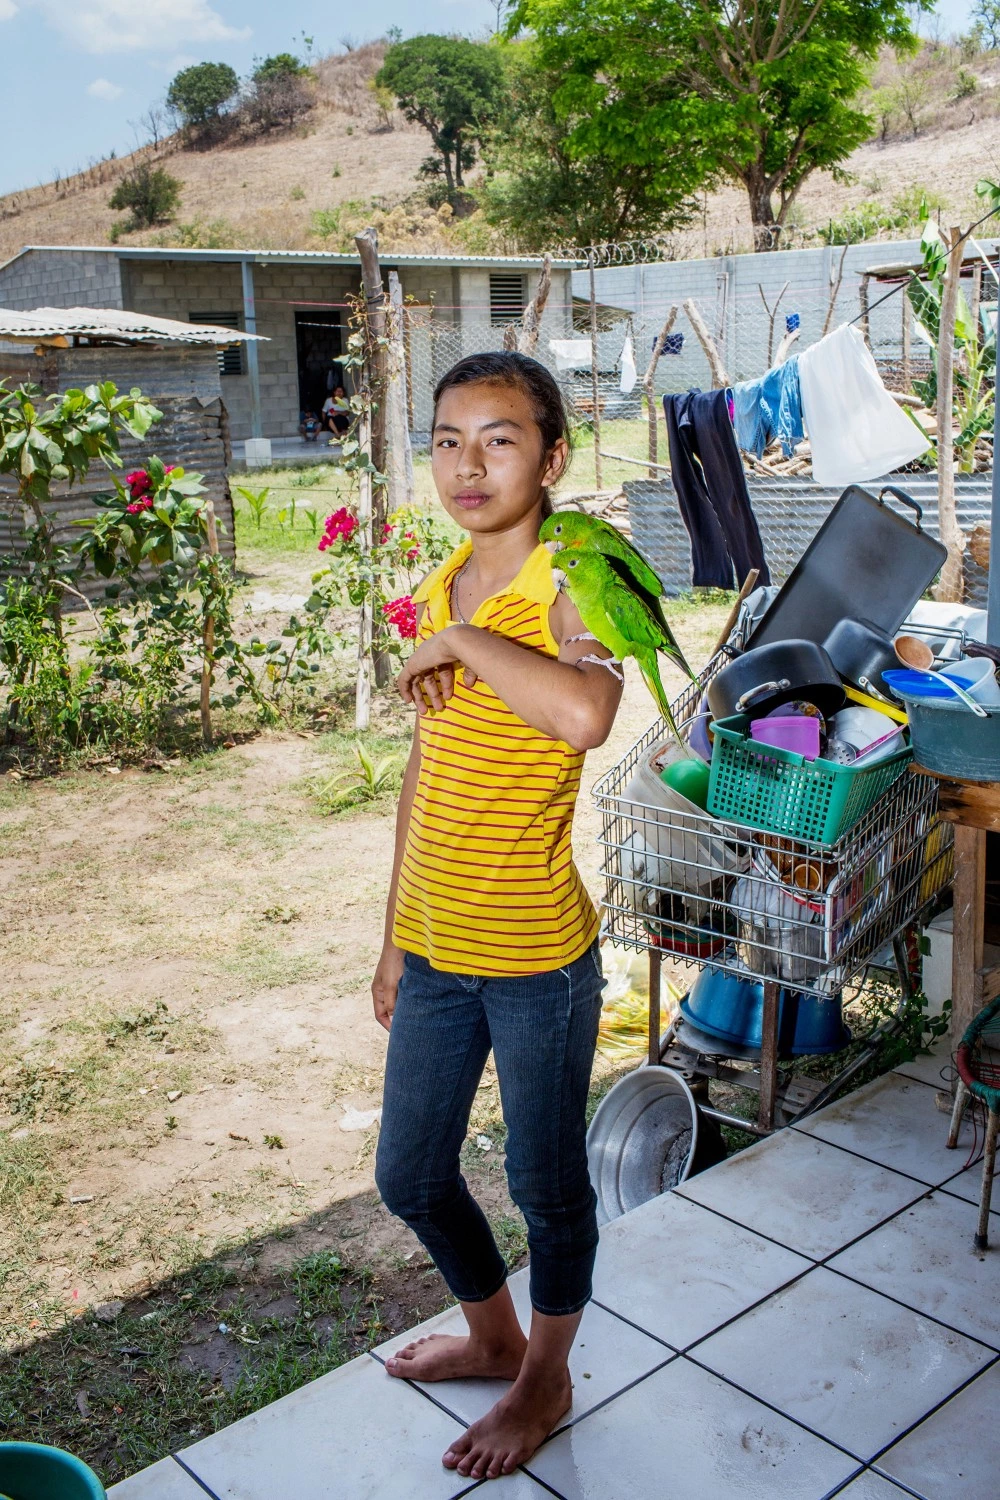 April 2017, El Salvador, San Salvador. 13 year old Kenya Fabiola Gonzales Trinidad holds her pet parrots on her arm at her home outside of San Salvador. She has just moved to the new community of new cinder block 3 room houses built with church donations, because her old neighborhood where she lived with her brother and grandfather was too dangerous due to gang activity. (Natalie Keyssar)